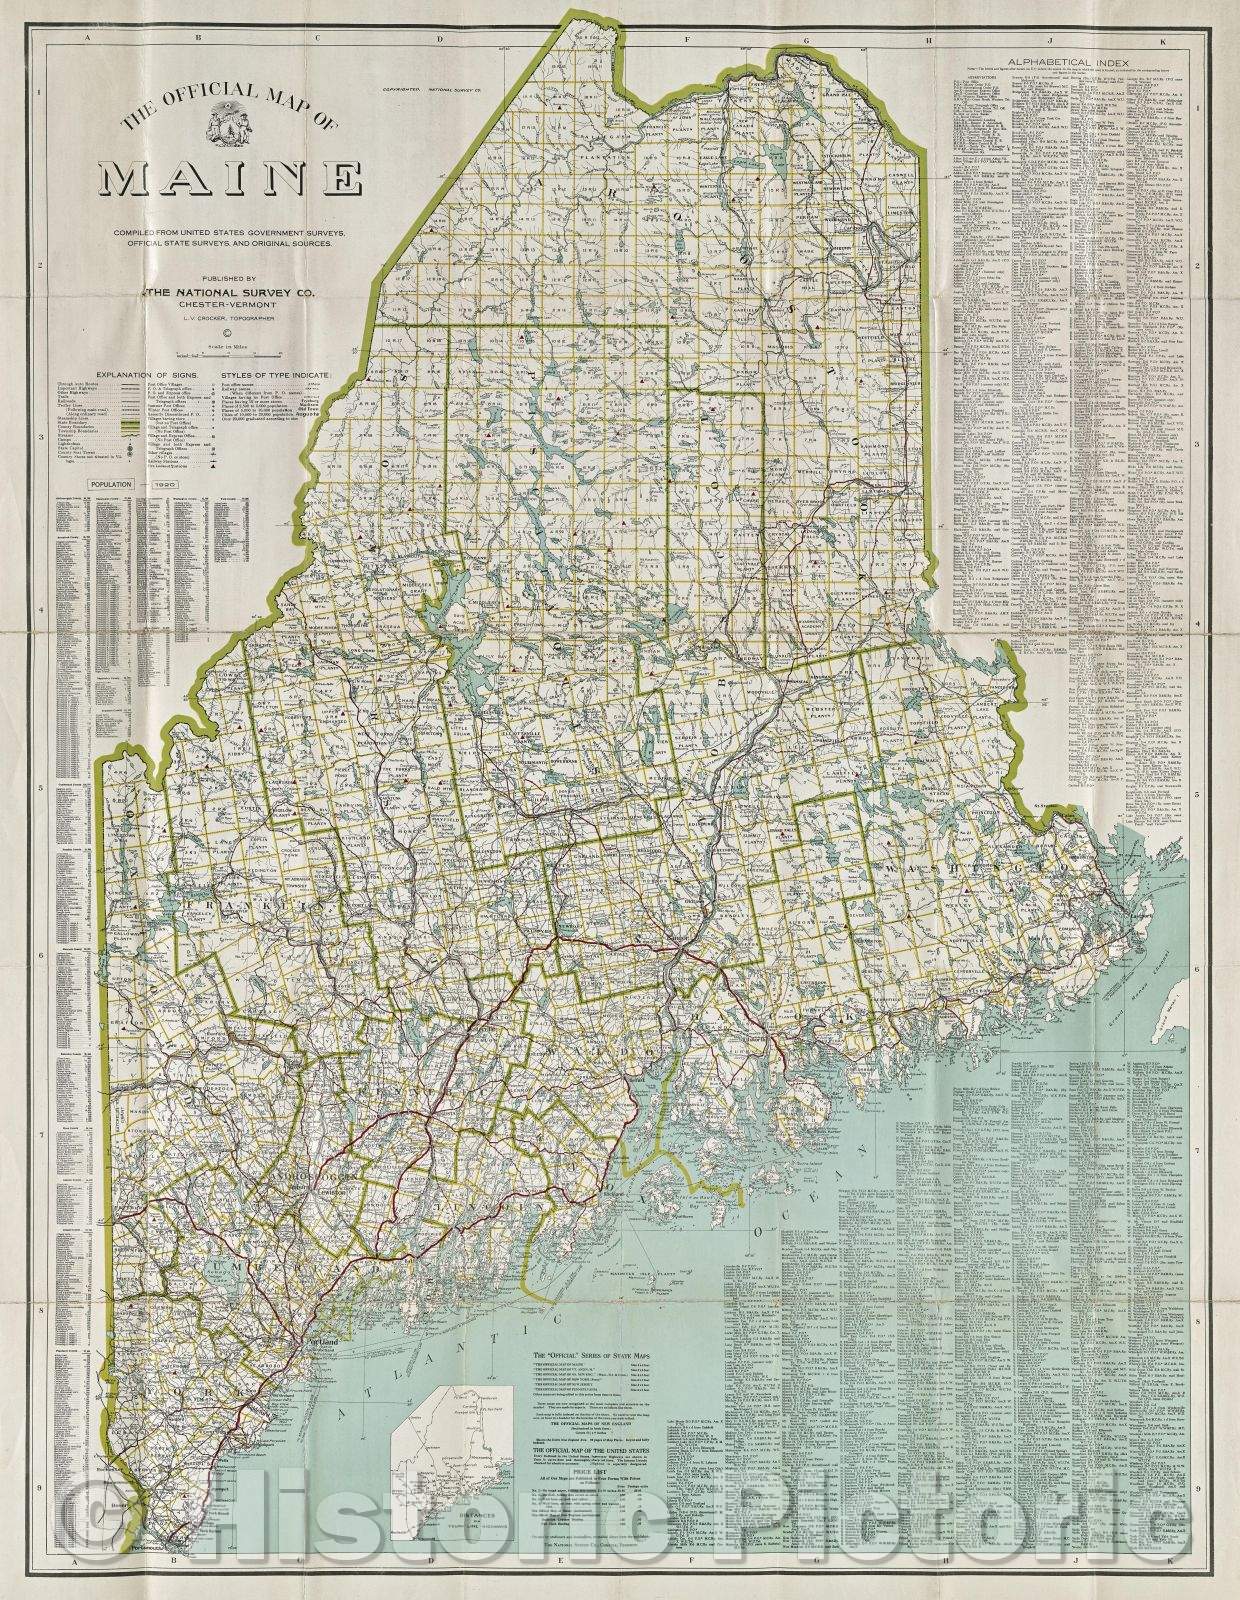 Historic Map : The Official Map of Maine compiled from United States Government Surveys, Official State Surveys, and Original Sources., 1920 , Vintage Wall Art